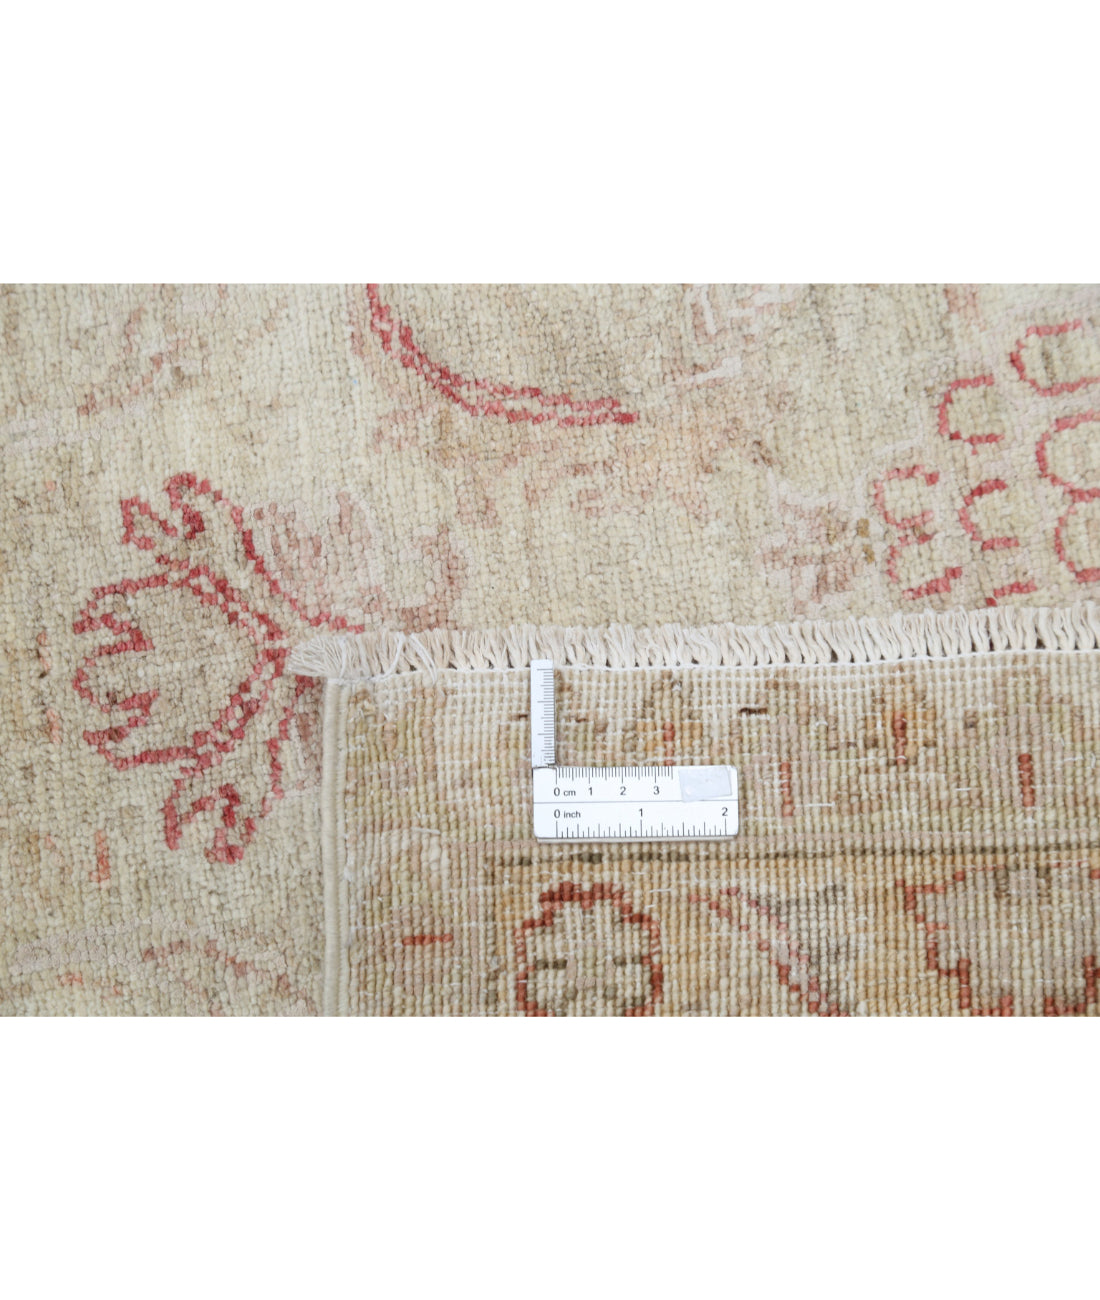 Hand Knotted Serenity Wool Rug - 8'10'' x 11'5'' 8'10'' x 11'5'' (265 X 343) / Ivory / Red